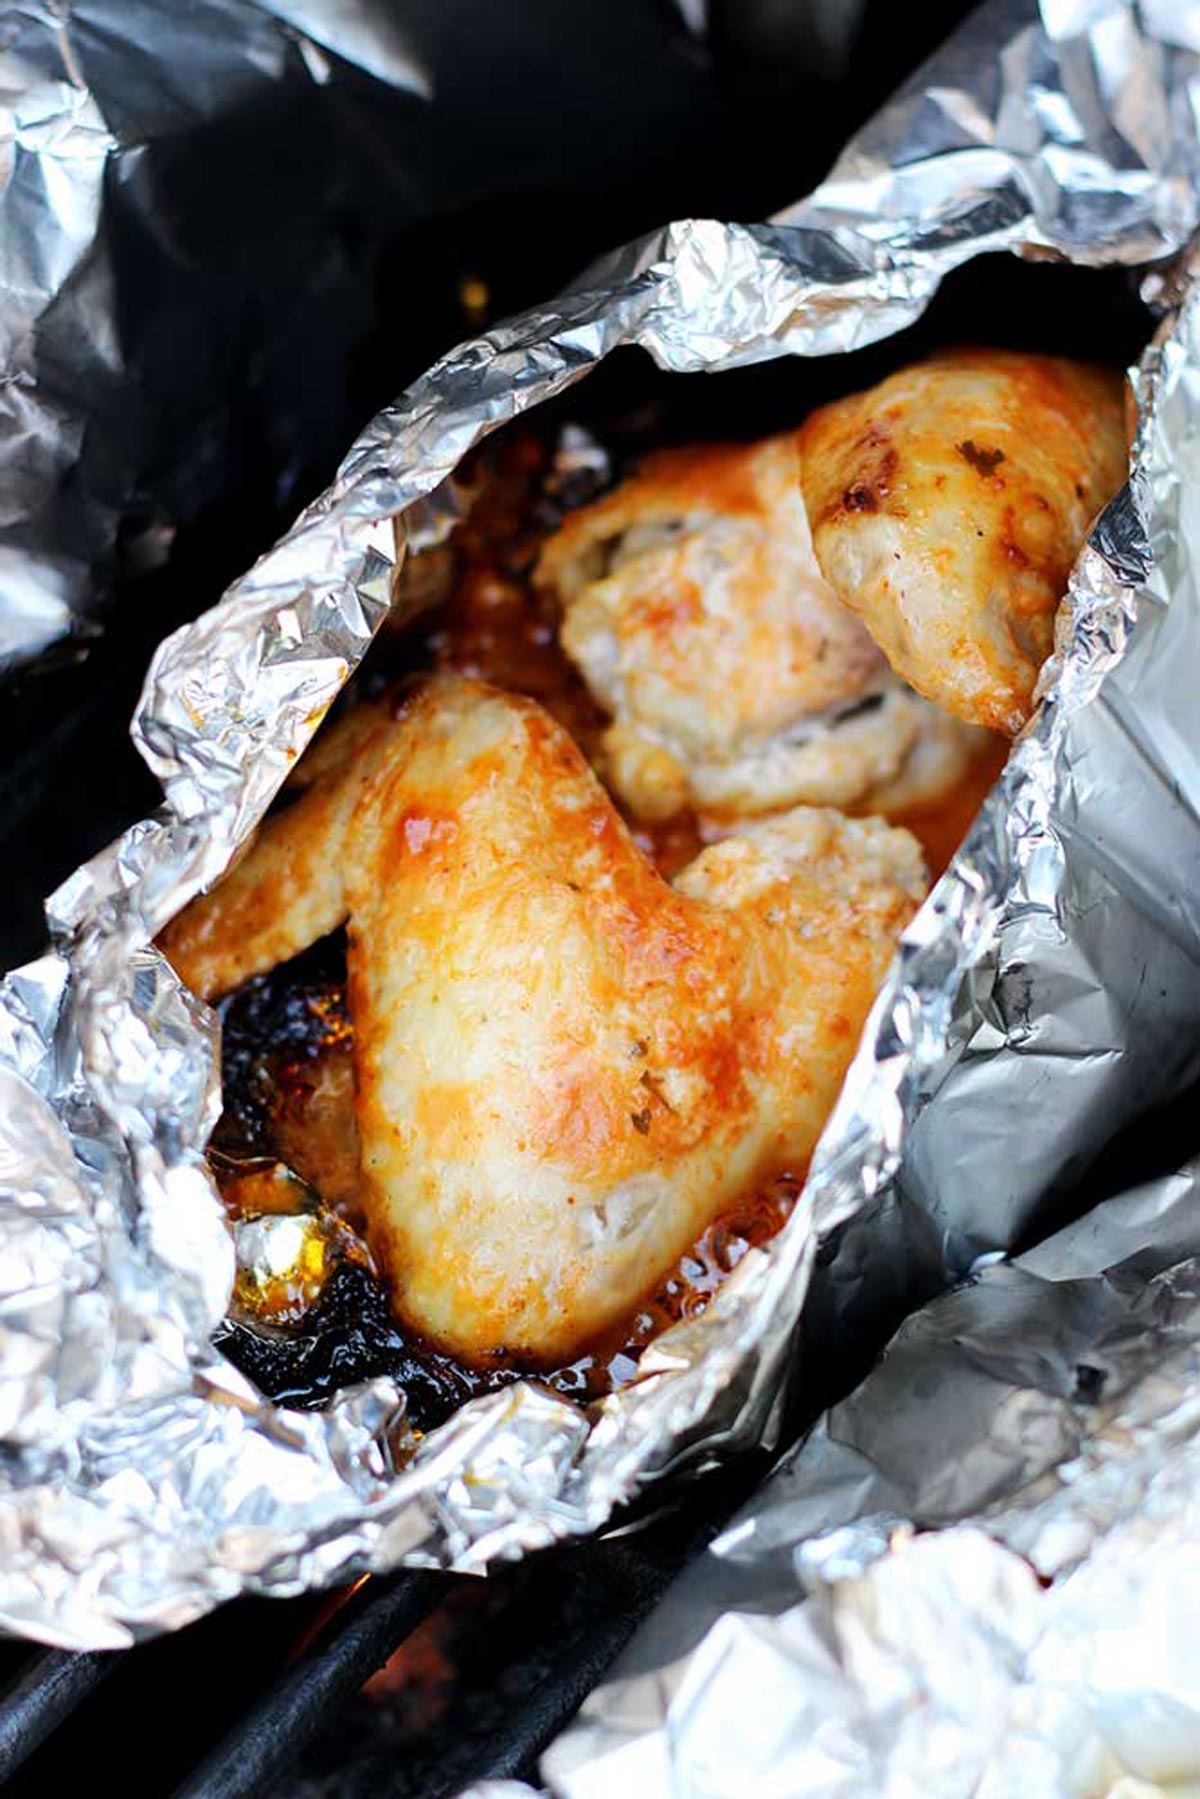 Aluminum foil pocket containing 2 BBQ chicken wings cooking on a grill.